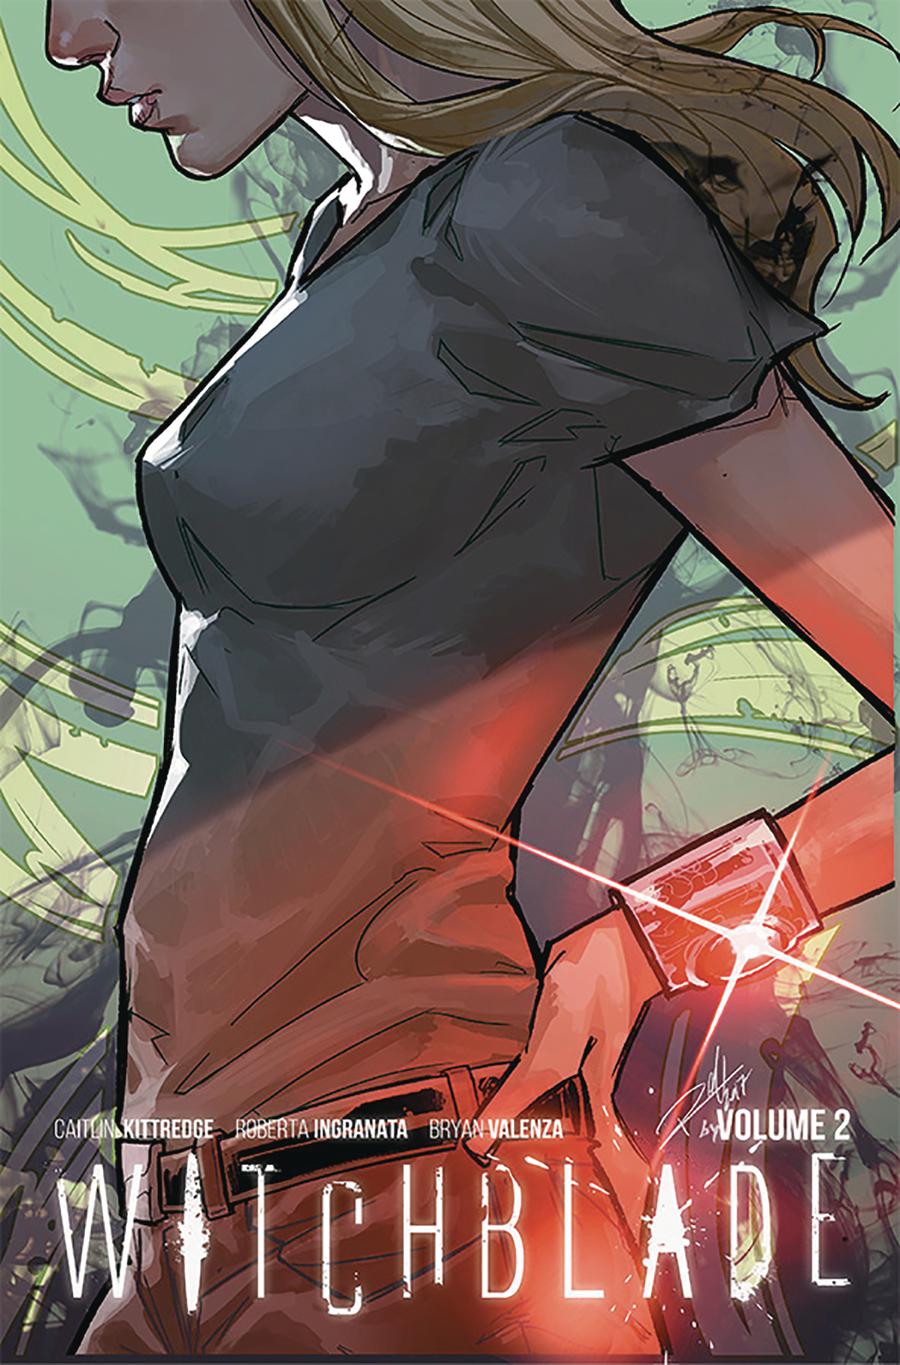 Witchblade (2017) Vol 2 Good Intentions TP